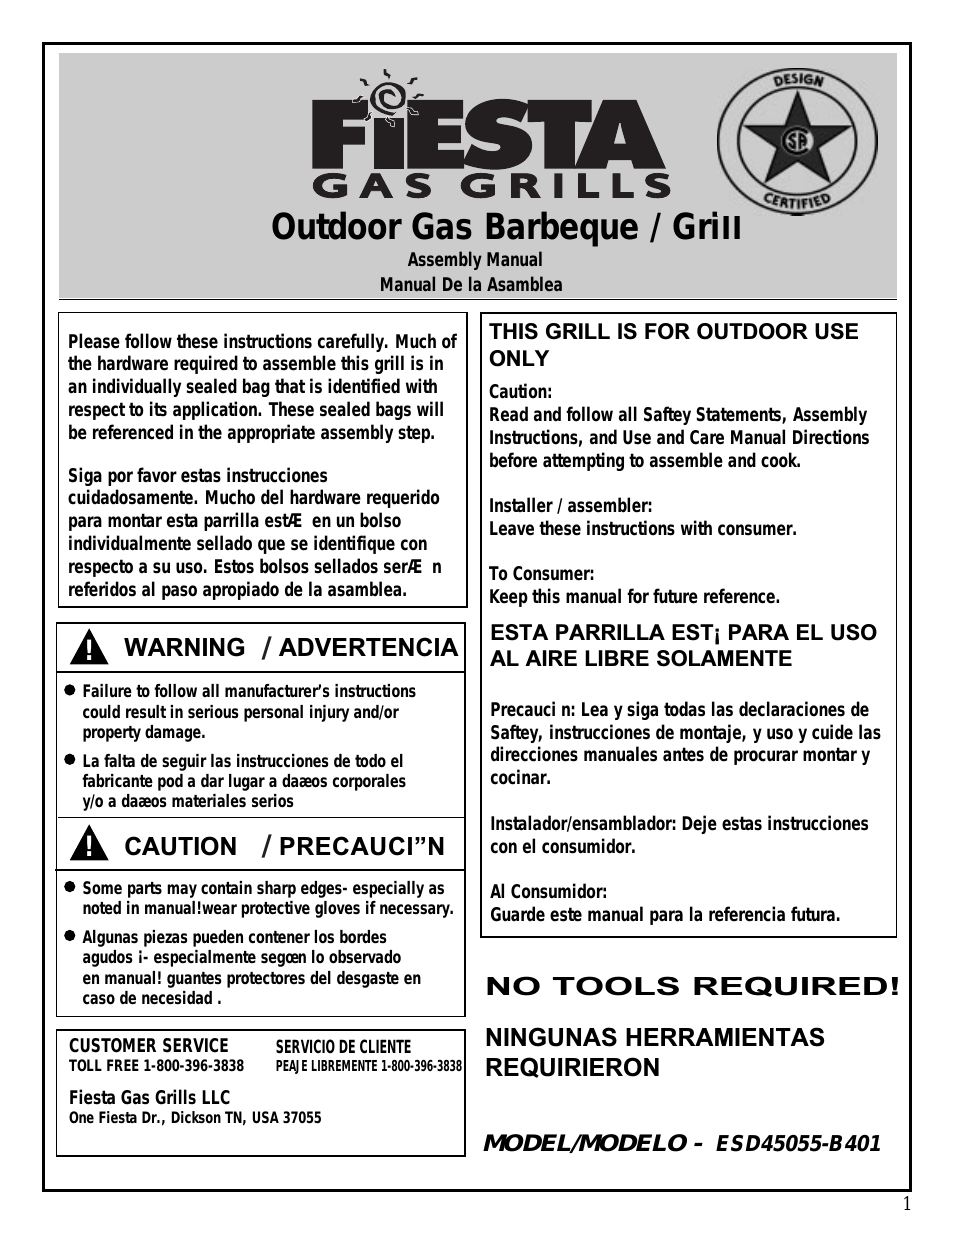 OUTDOOR GAS BARBEQUE / GRILL ESD45055-B401